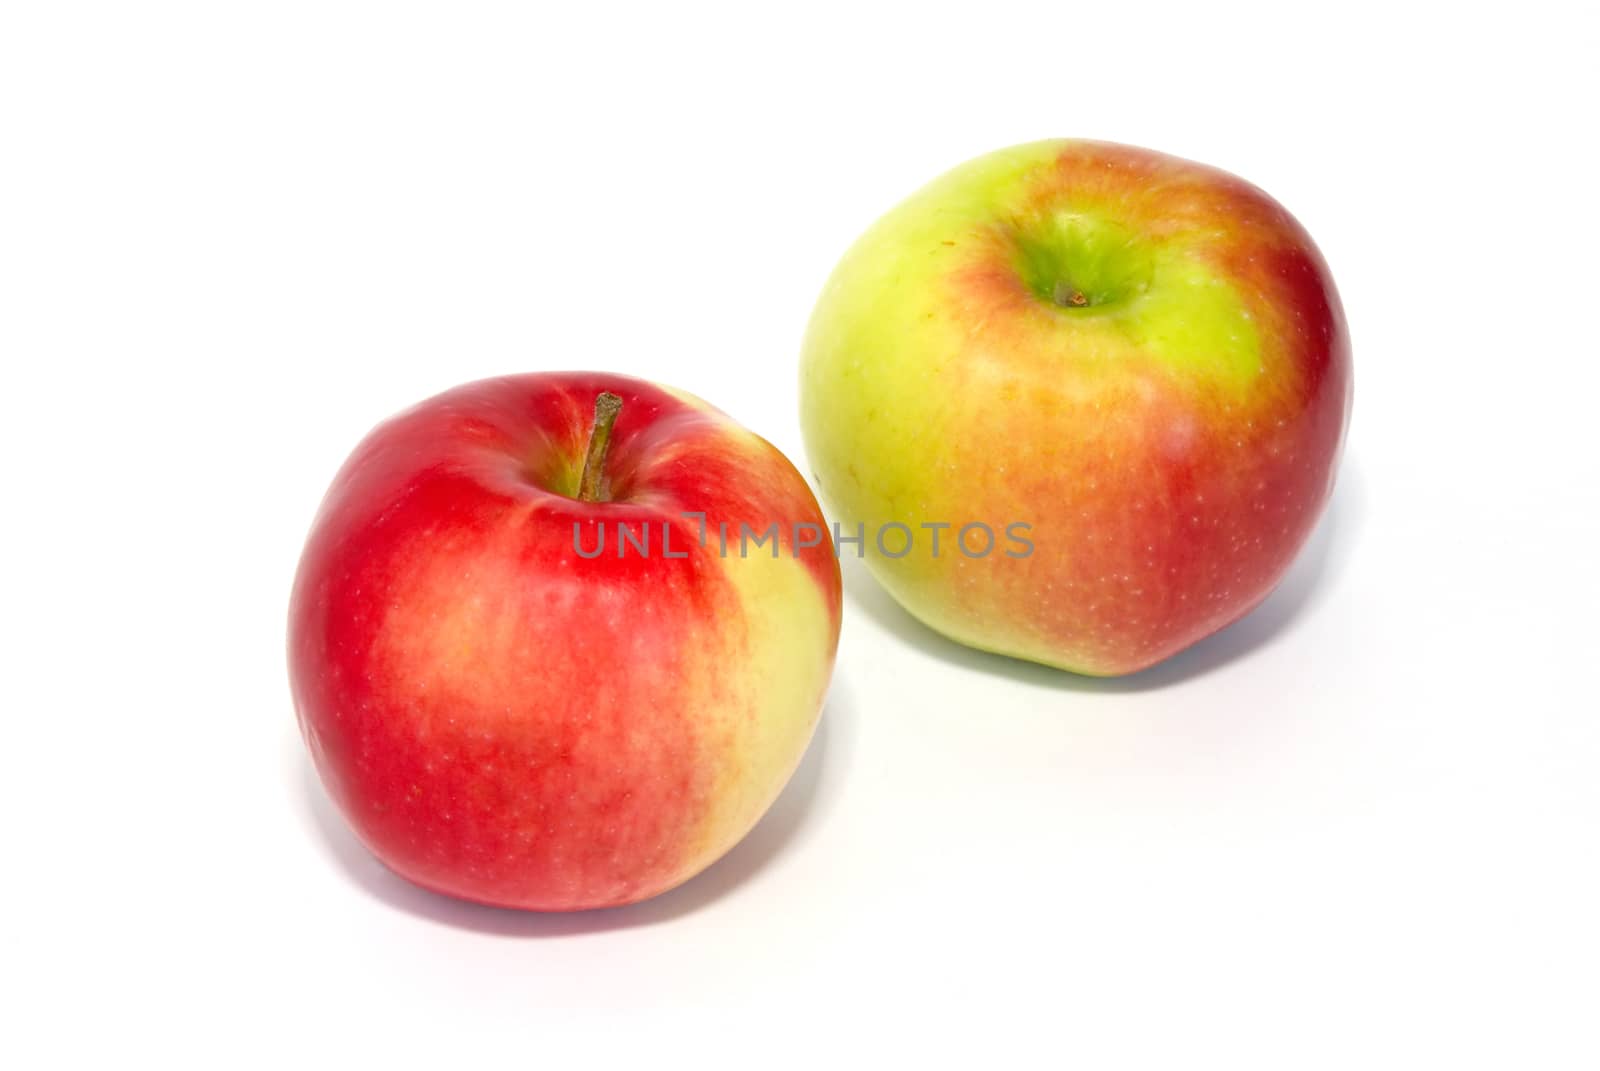 Two red fresh apples isolated on white.